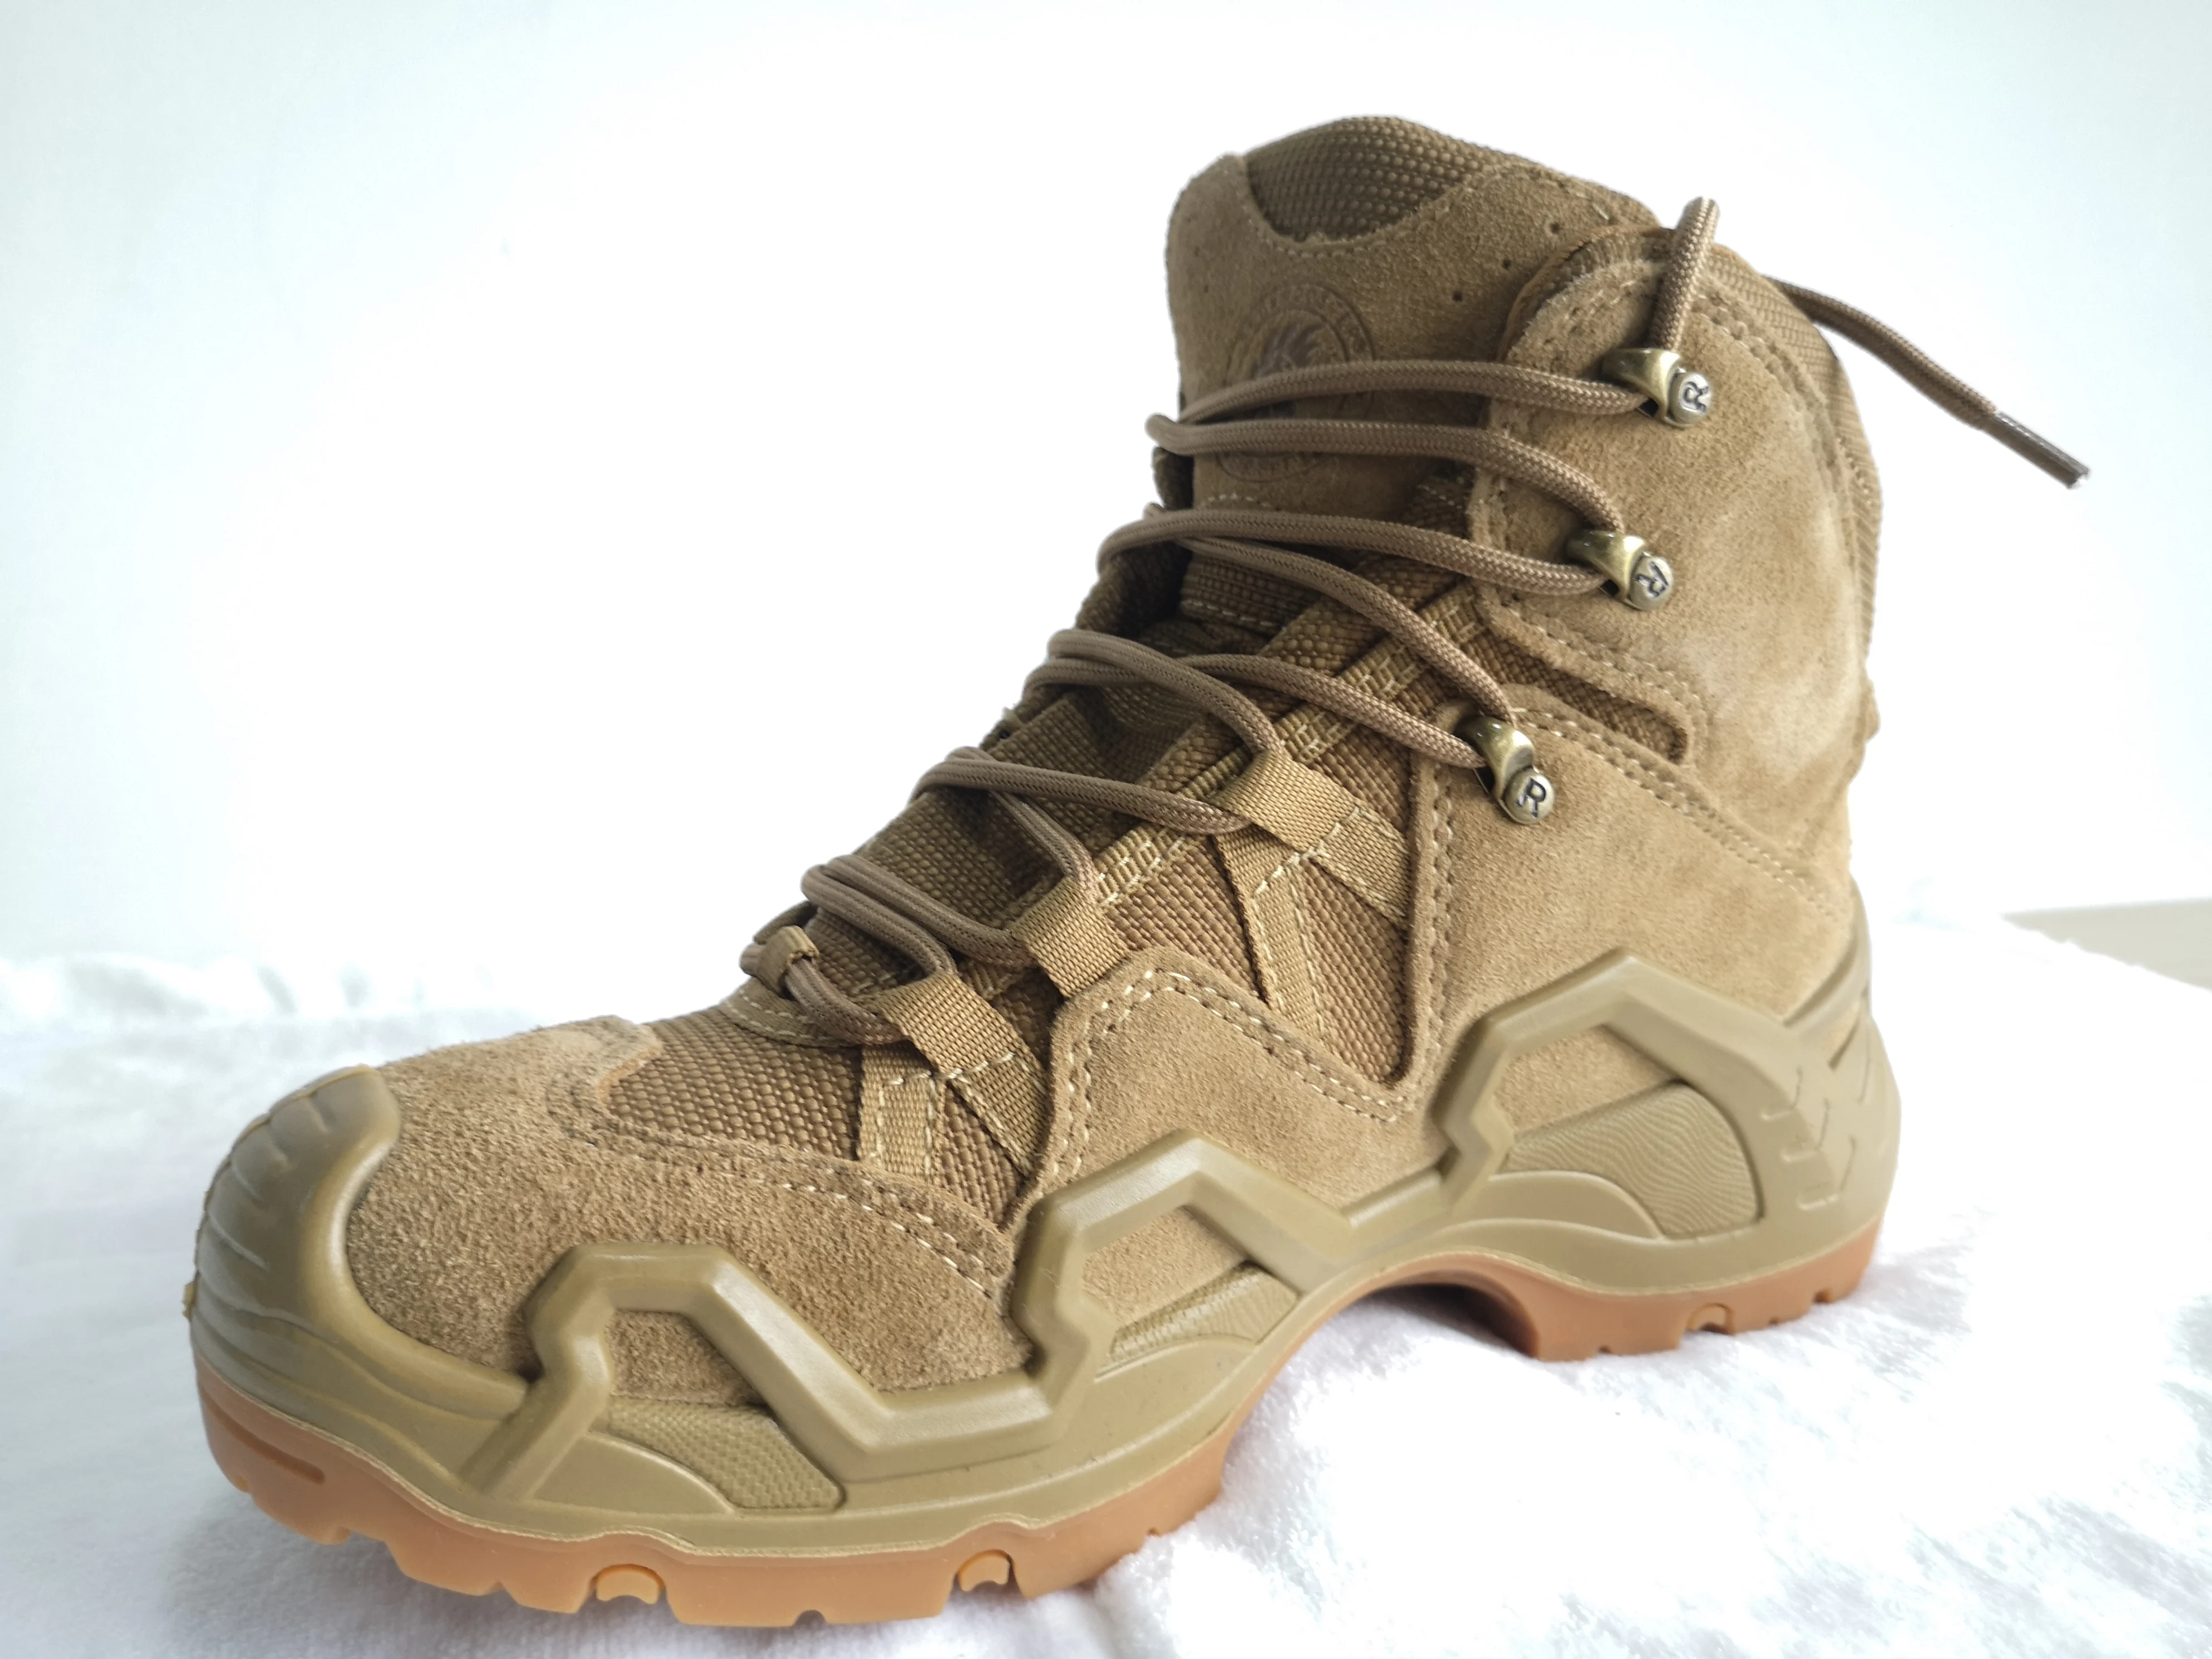 
mountain boots army cool boots mens military hiking boots md20 